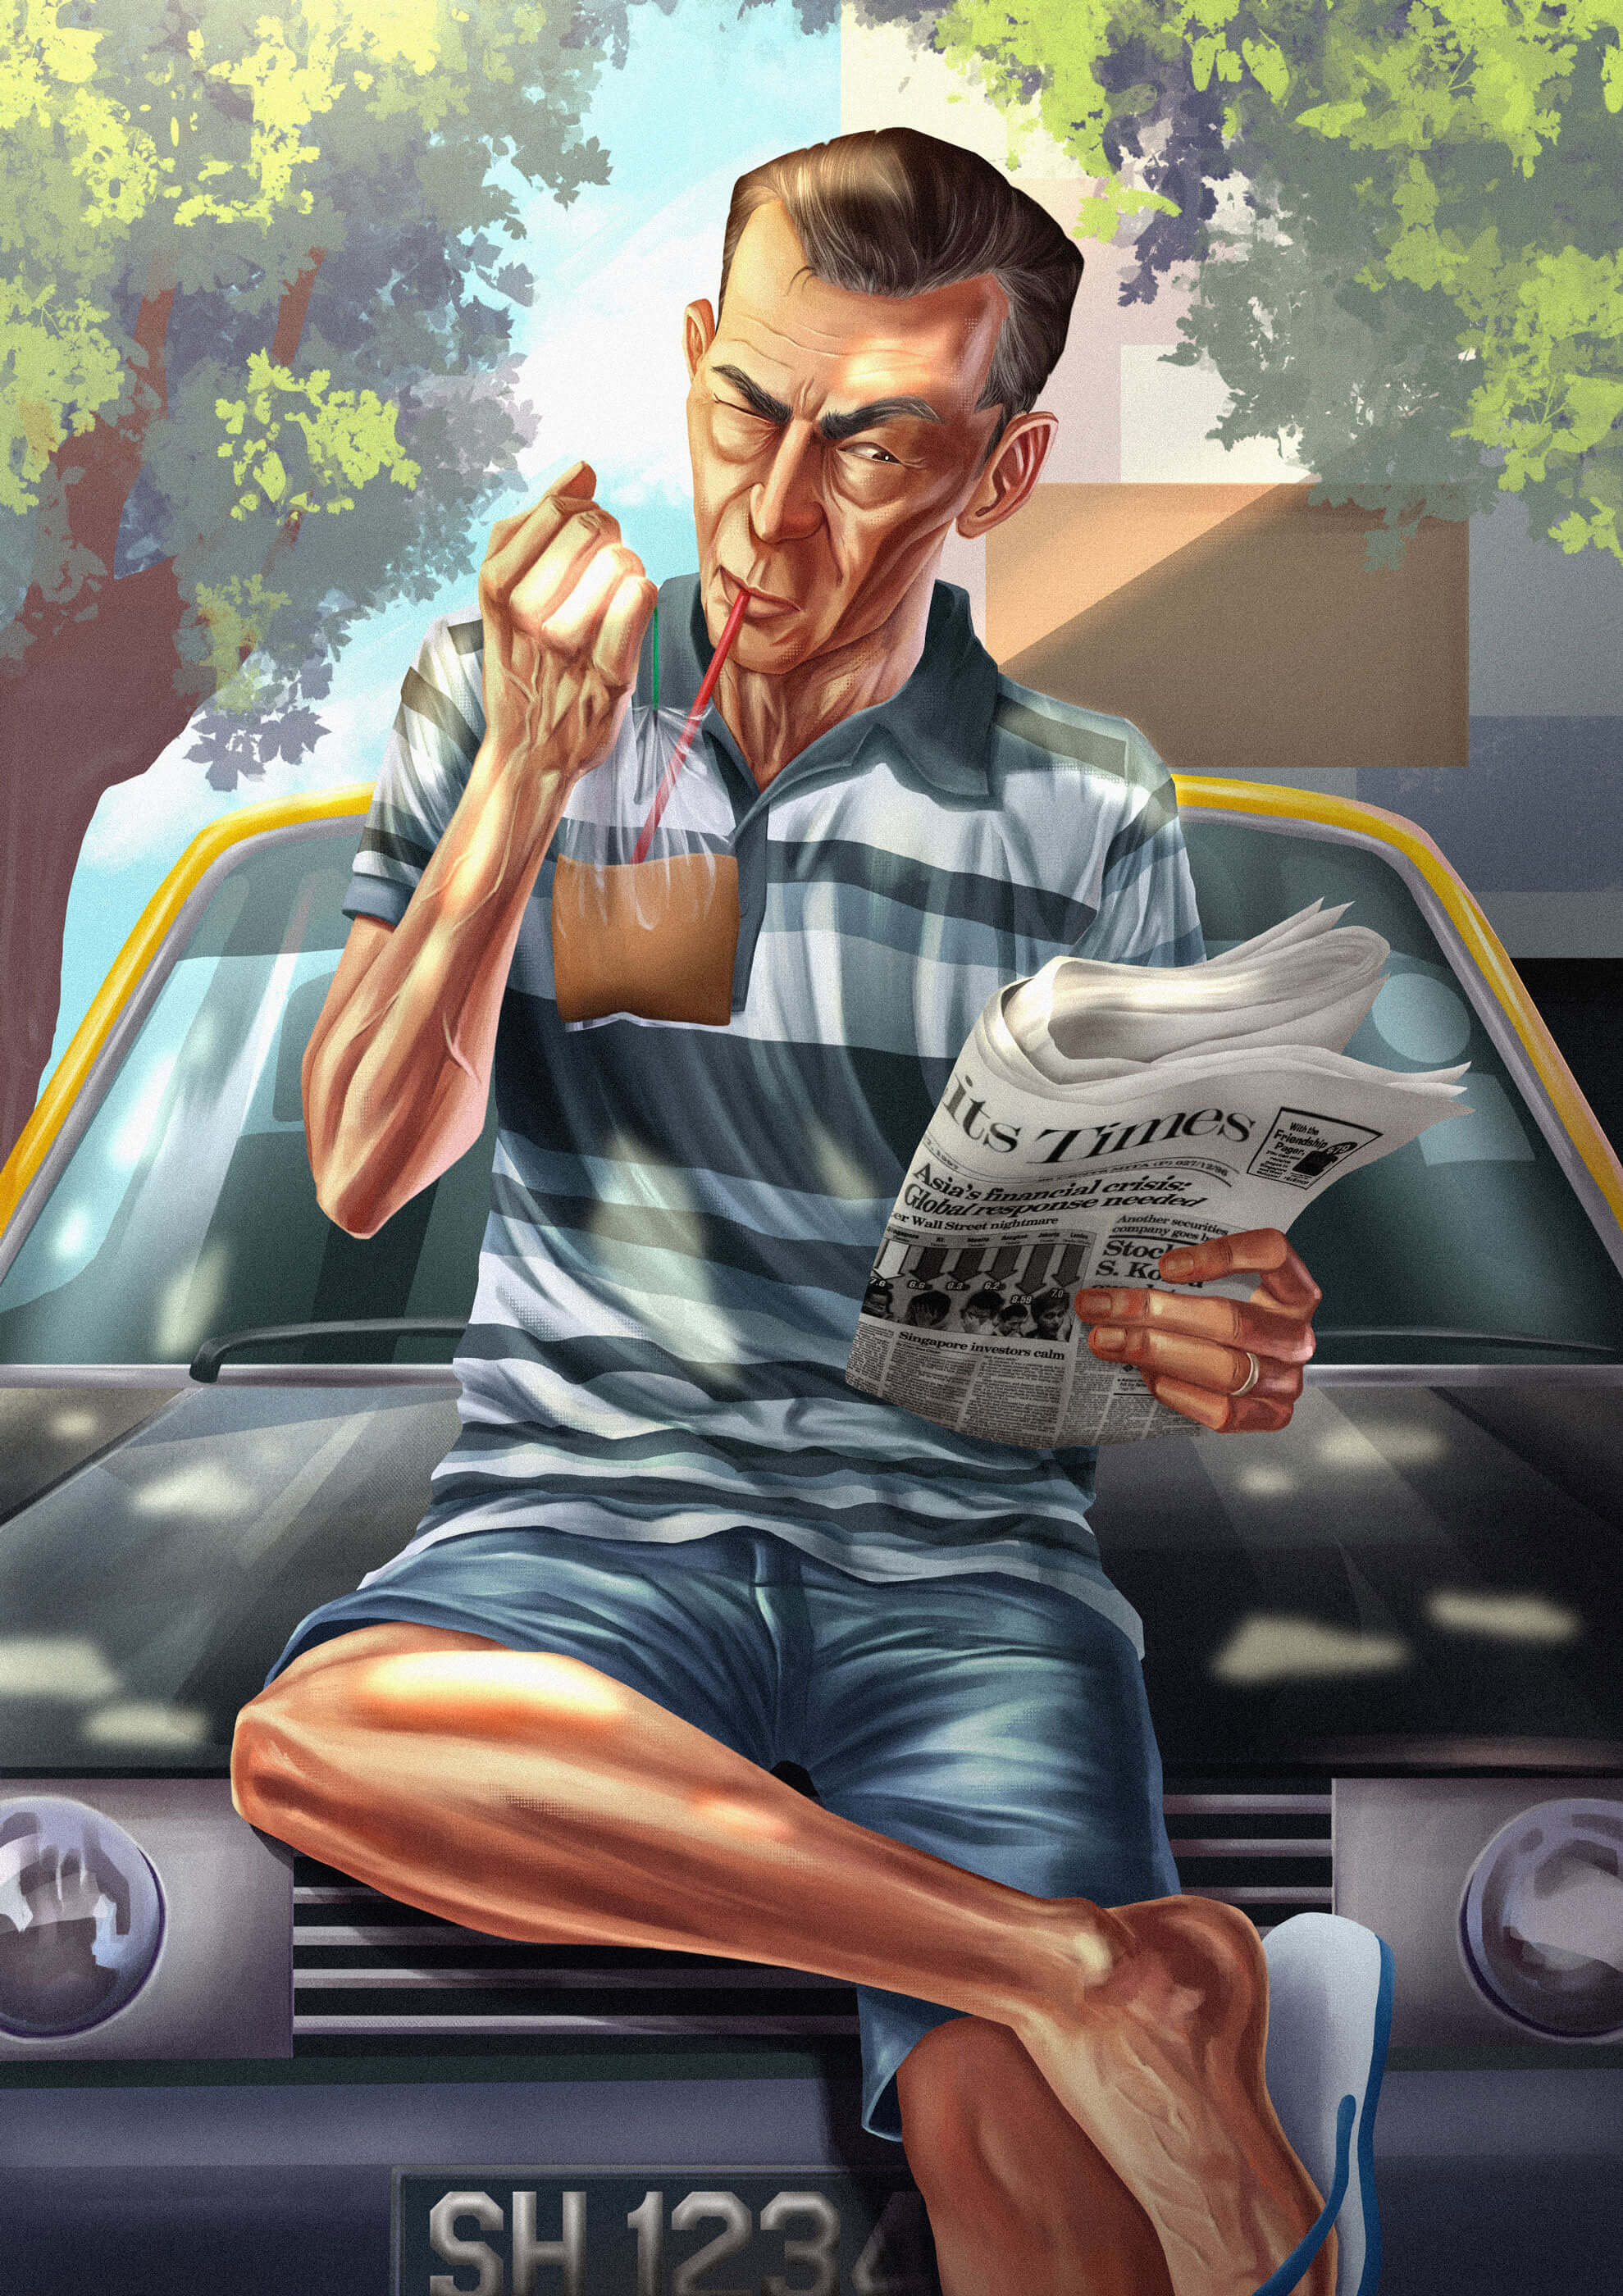 A man sips on a brown drink through a straw while leaning on a car